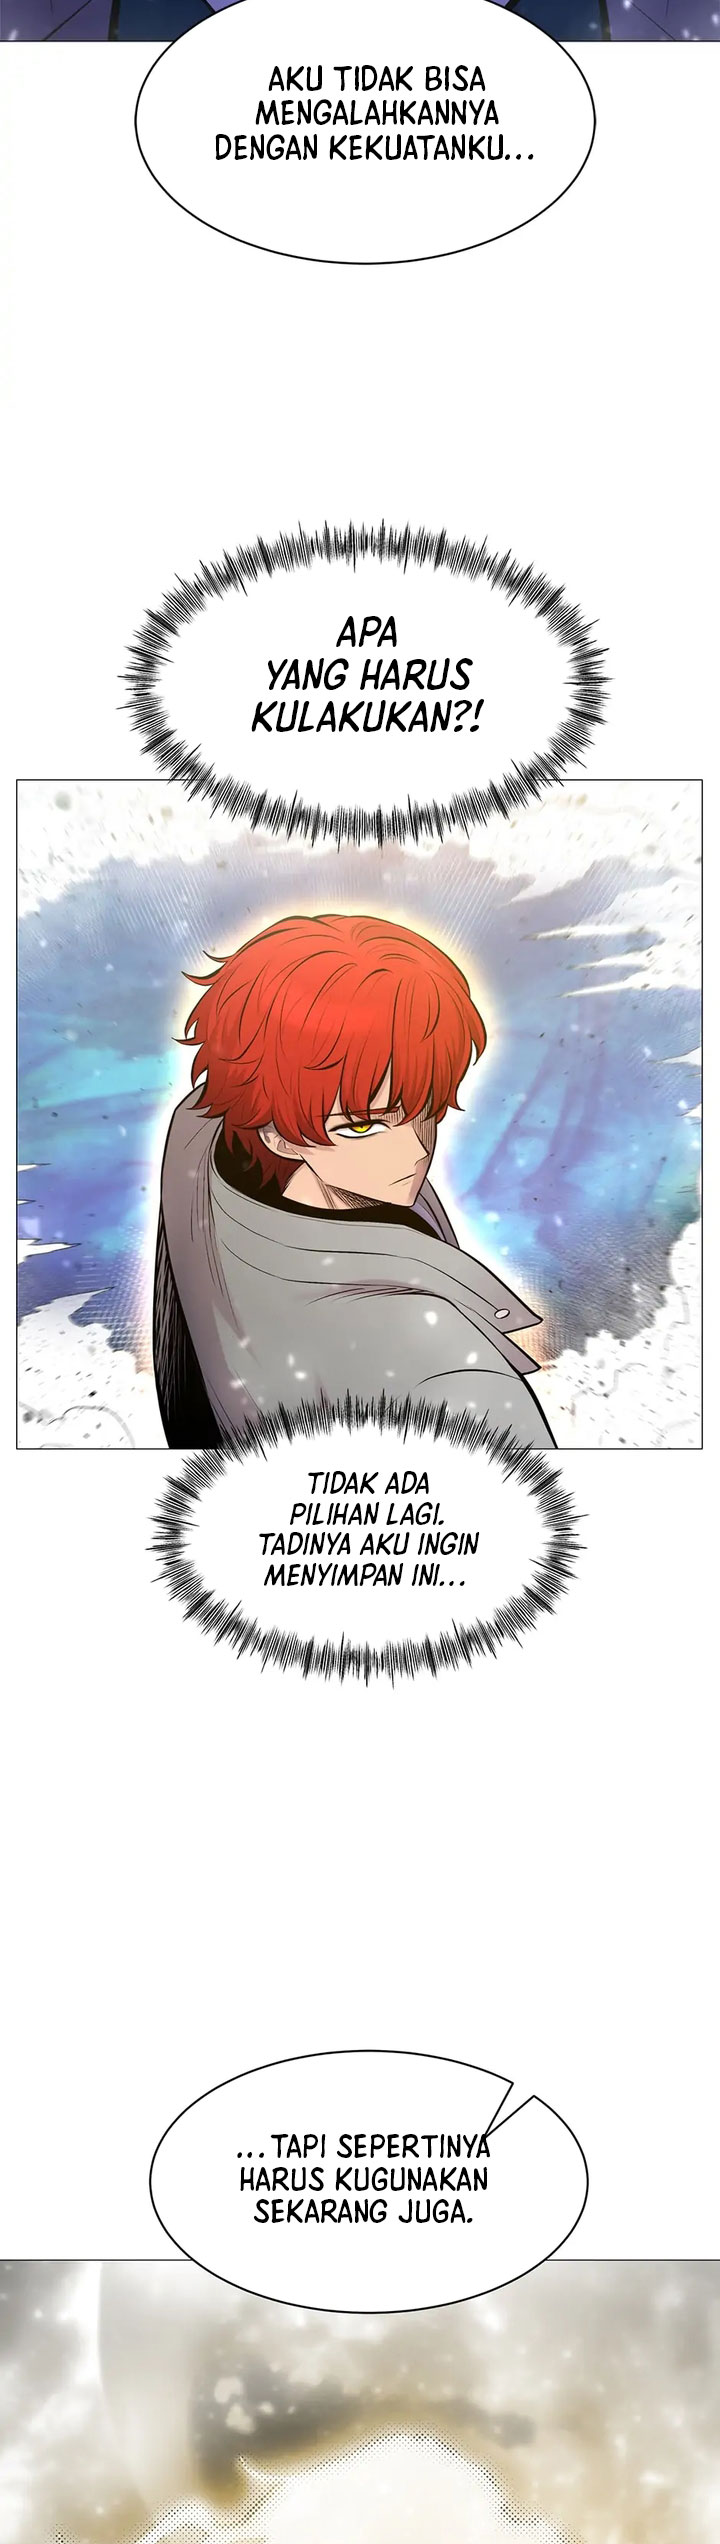 Updater Chapter 106 - 297